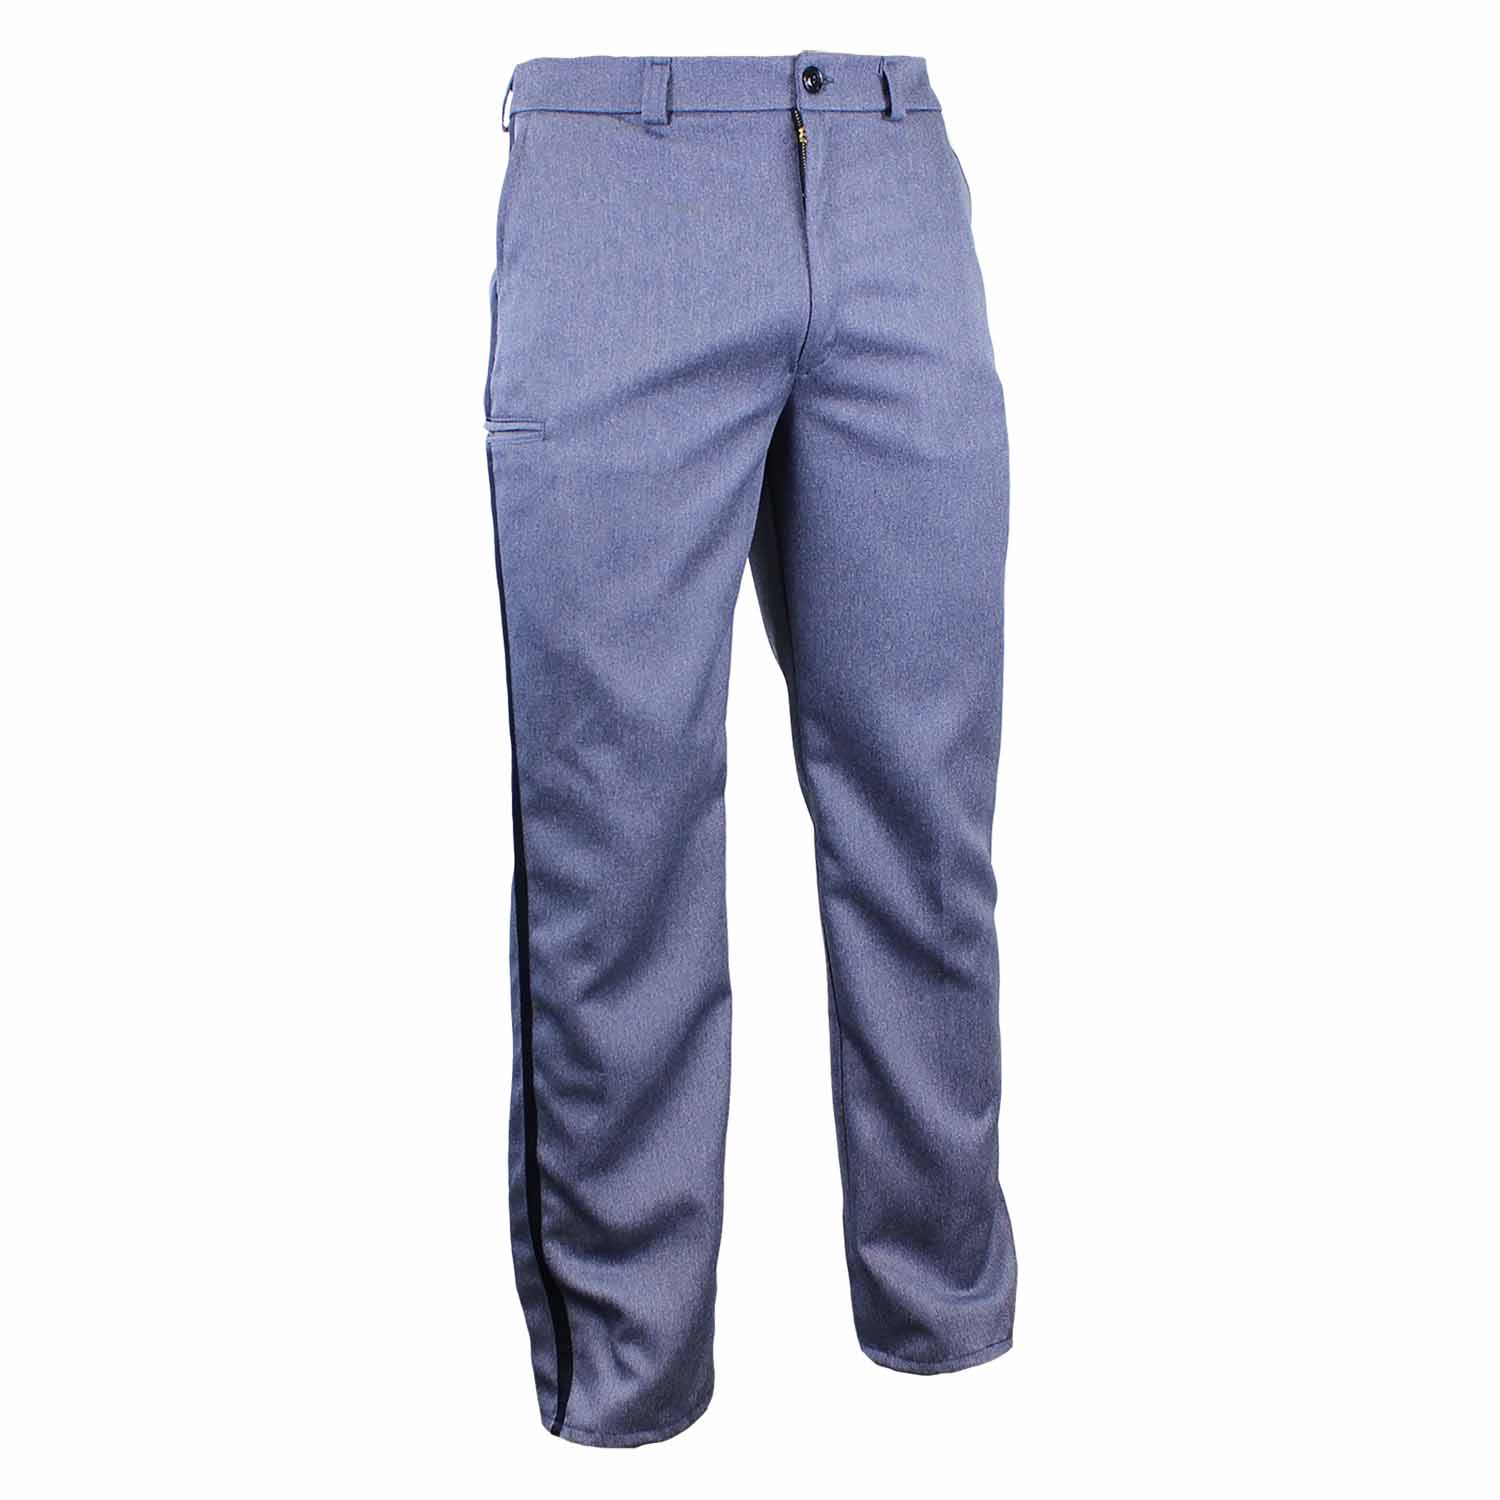 Men's Letter Carrier Winter Weight Trousers